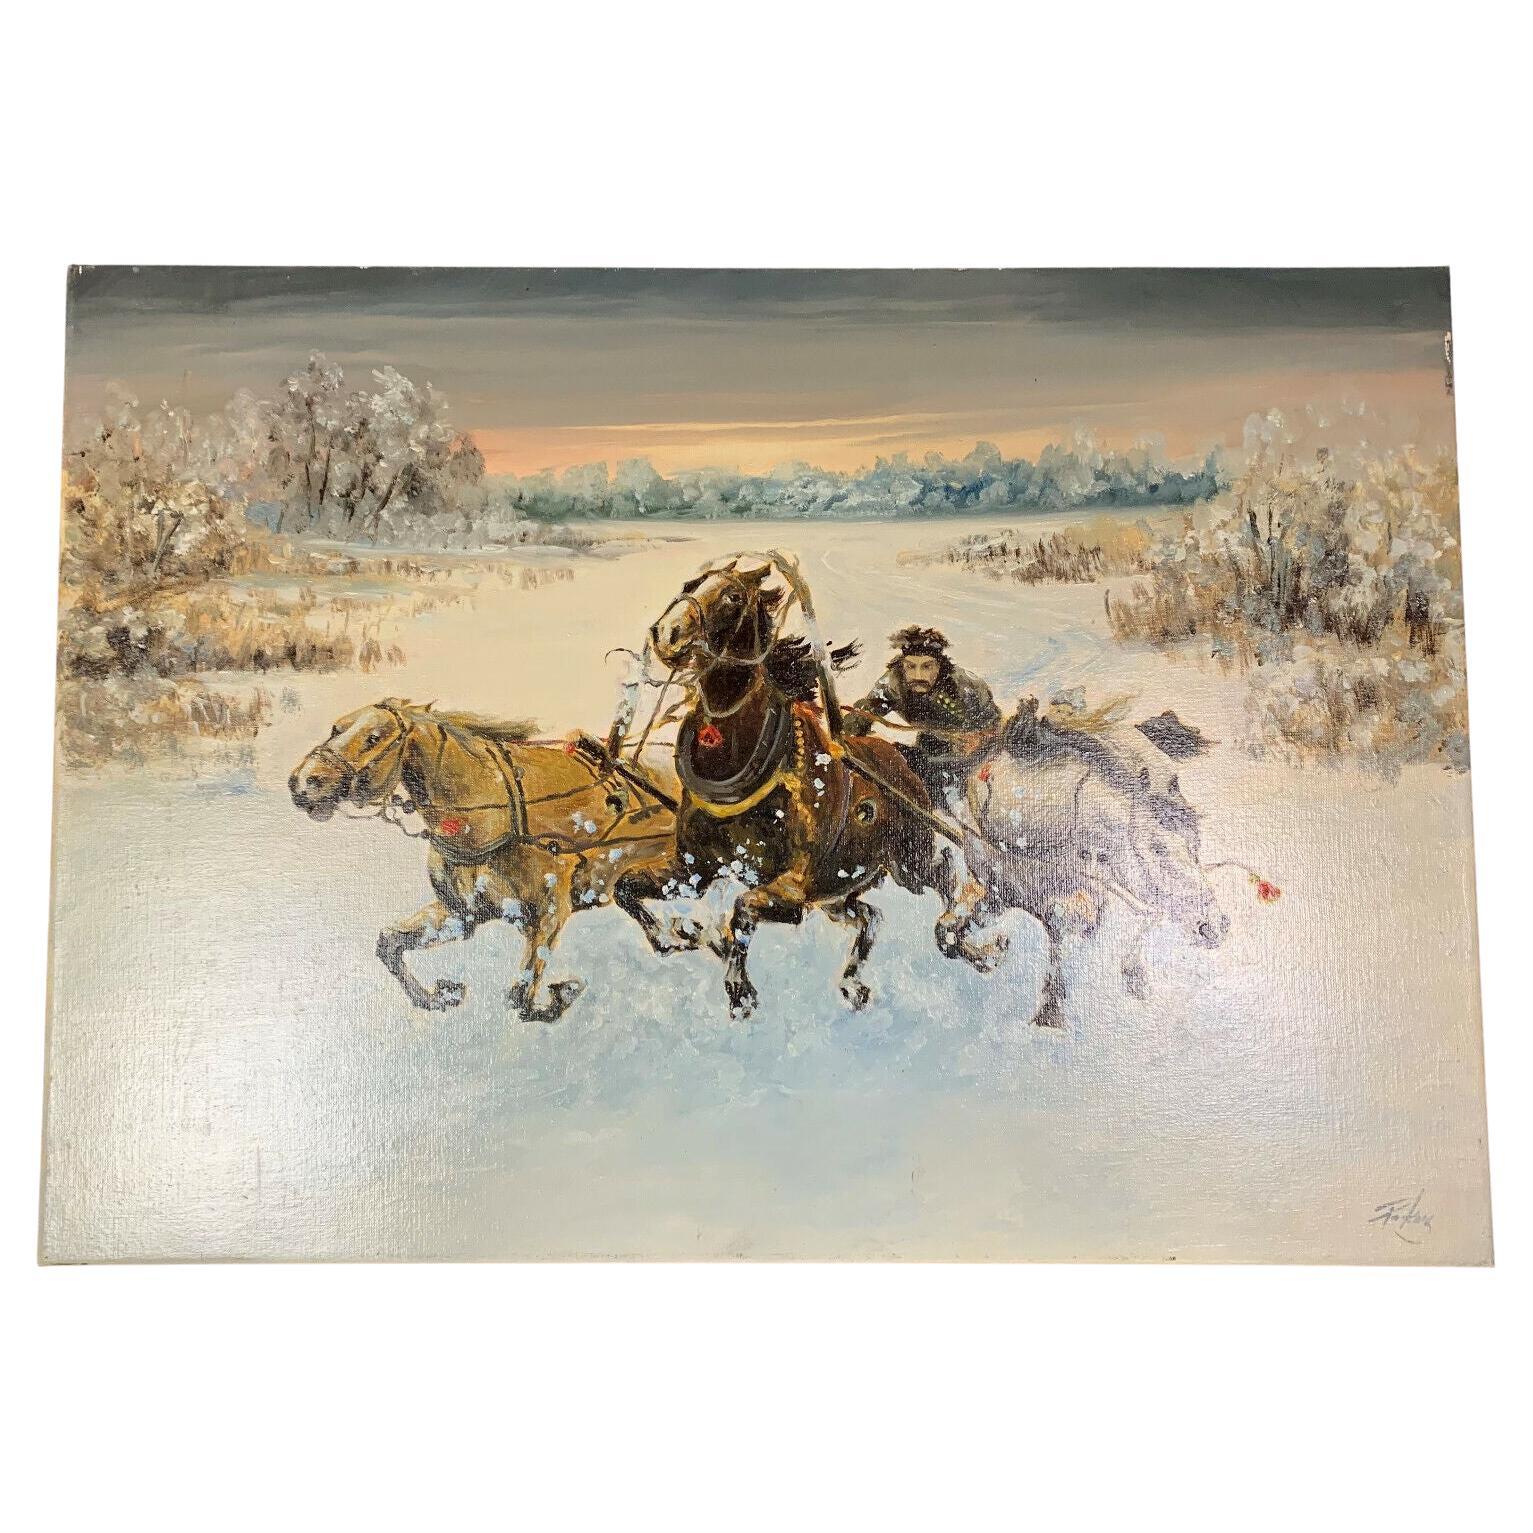 Captivating Russian Artwork from the Late 19th Century: "Winter Ride" -1X10 For Sale